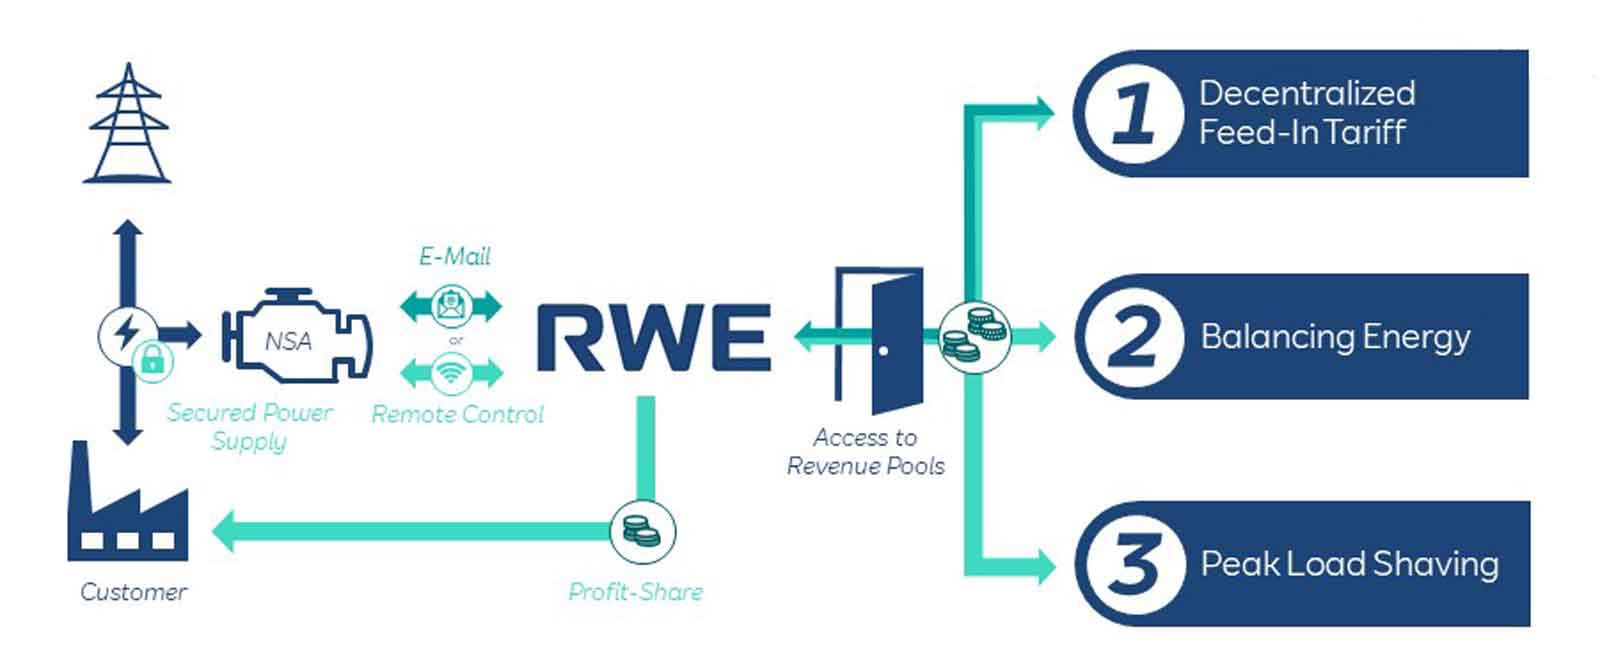 Schematic representation of the RWE optimization concept for emergency power generators